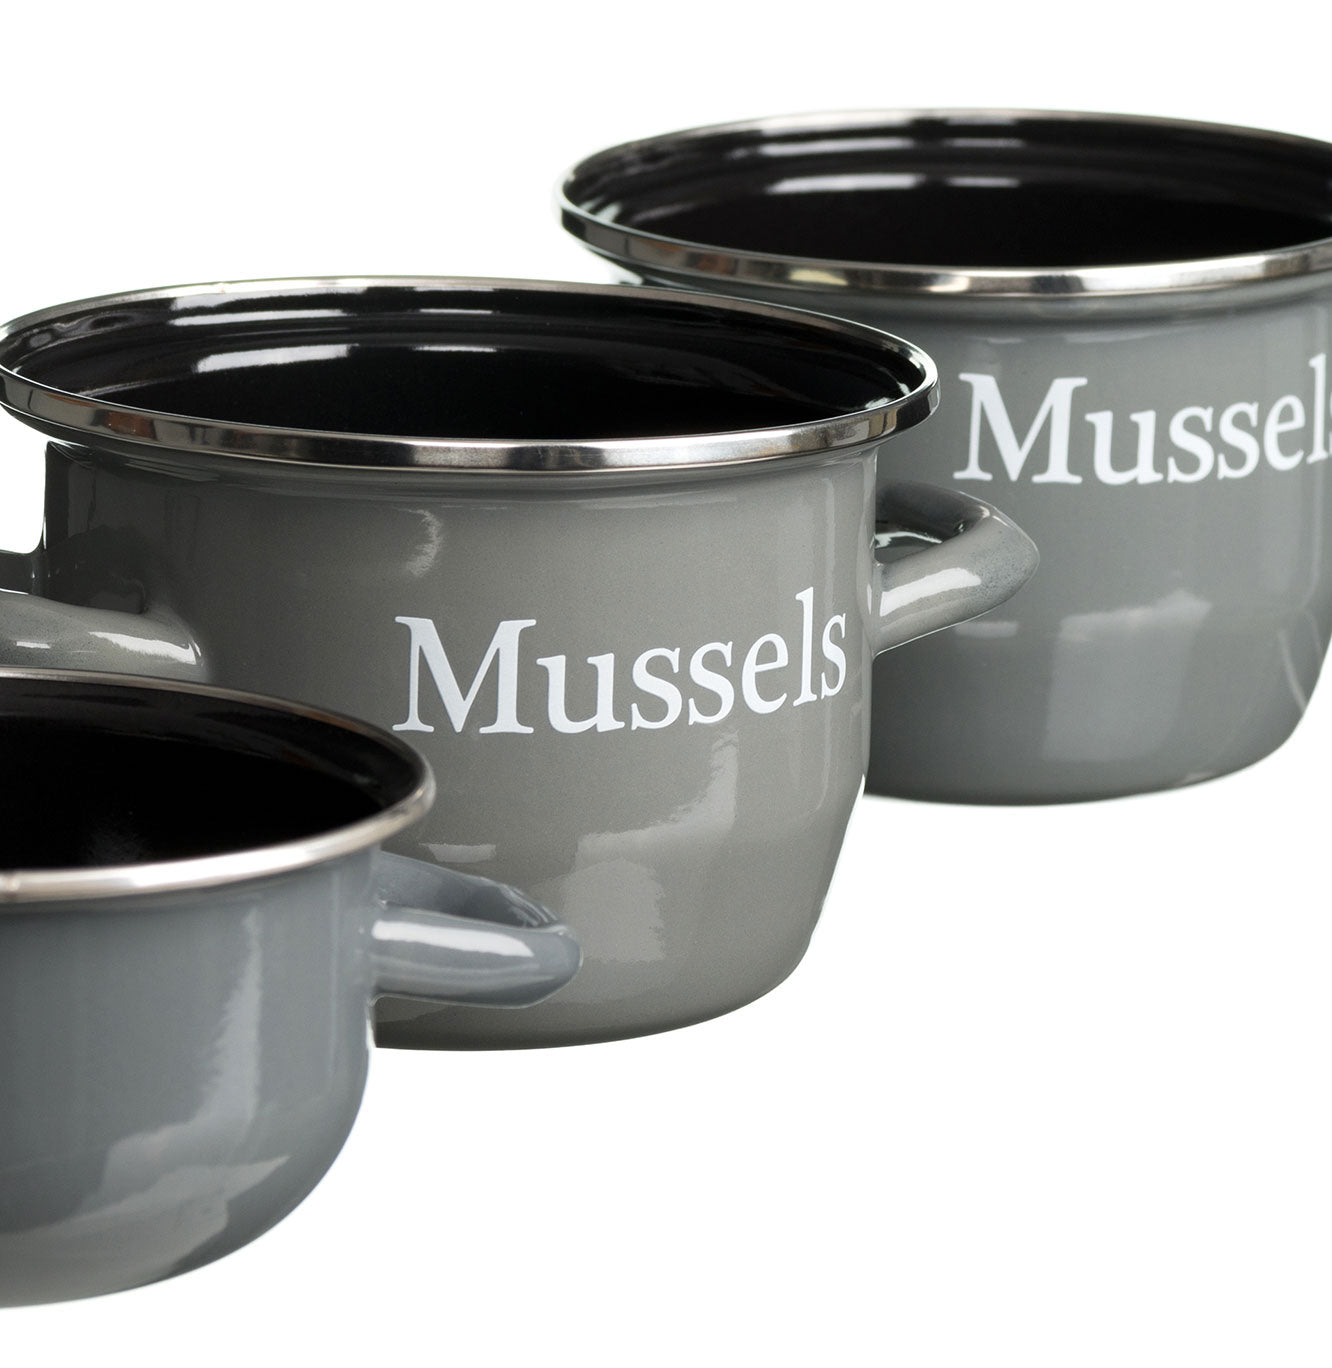 Grey Enamelled Mussel Pots from China Blue